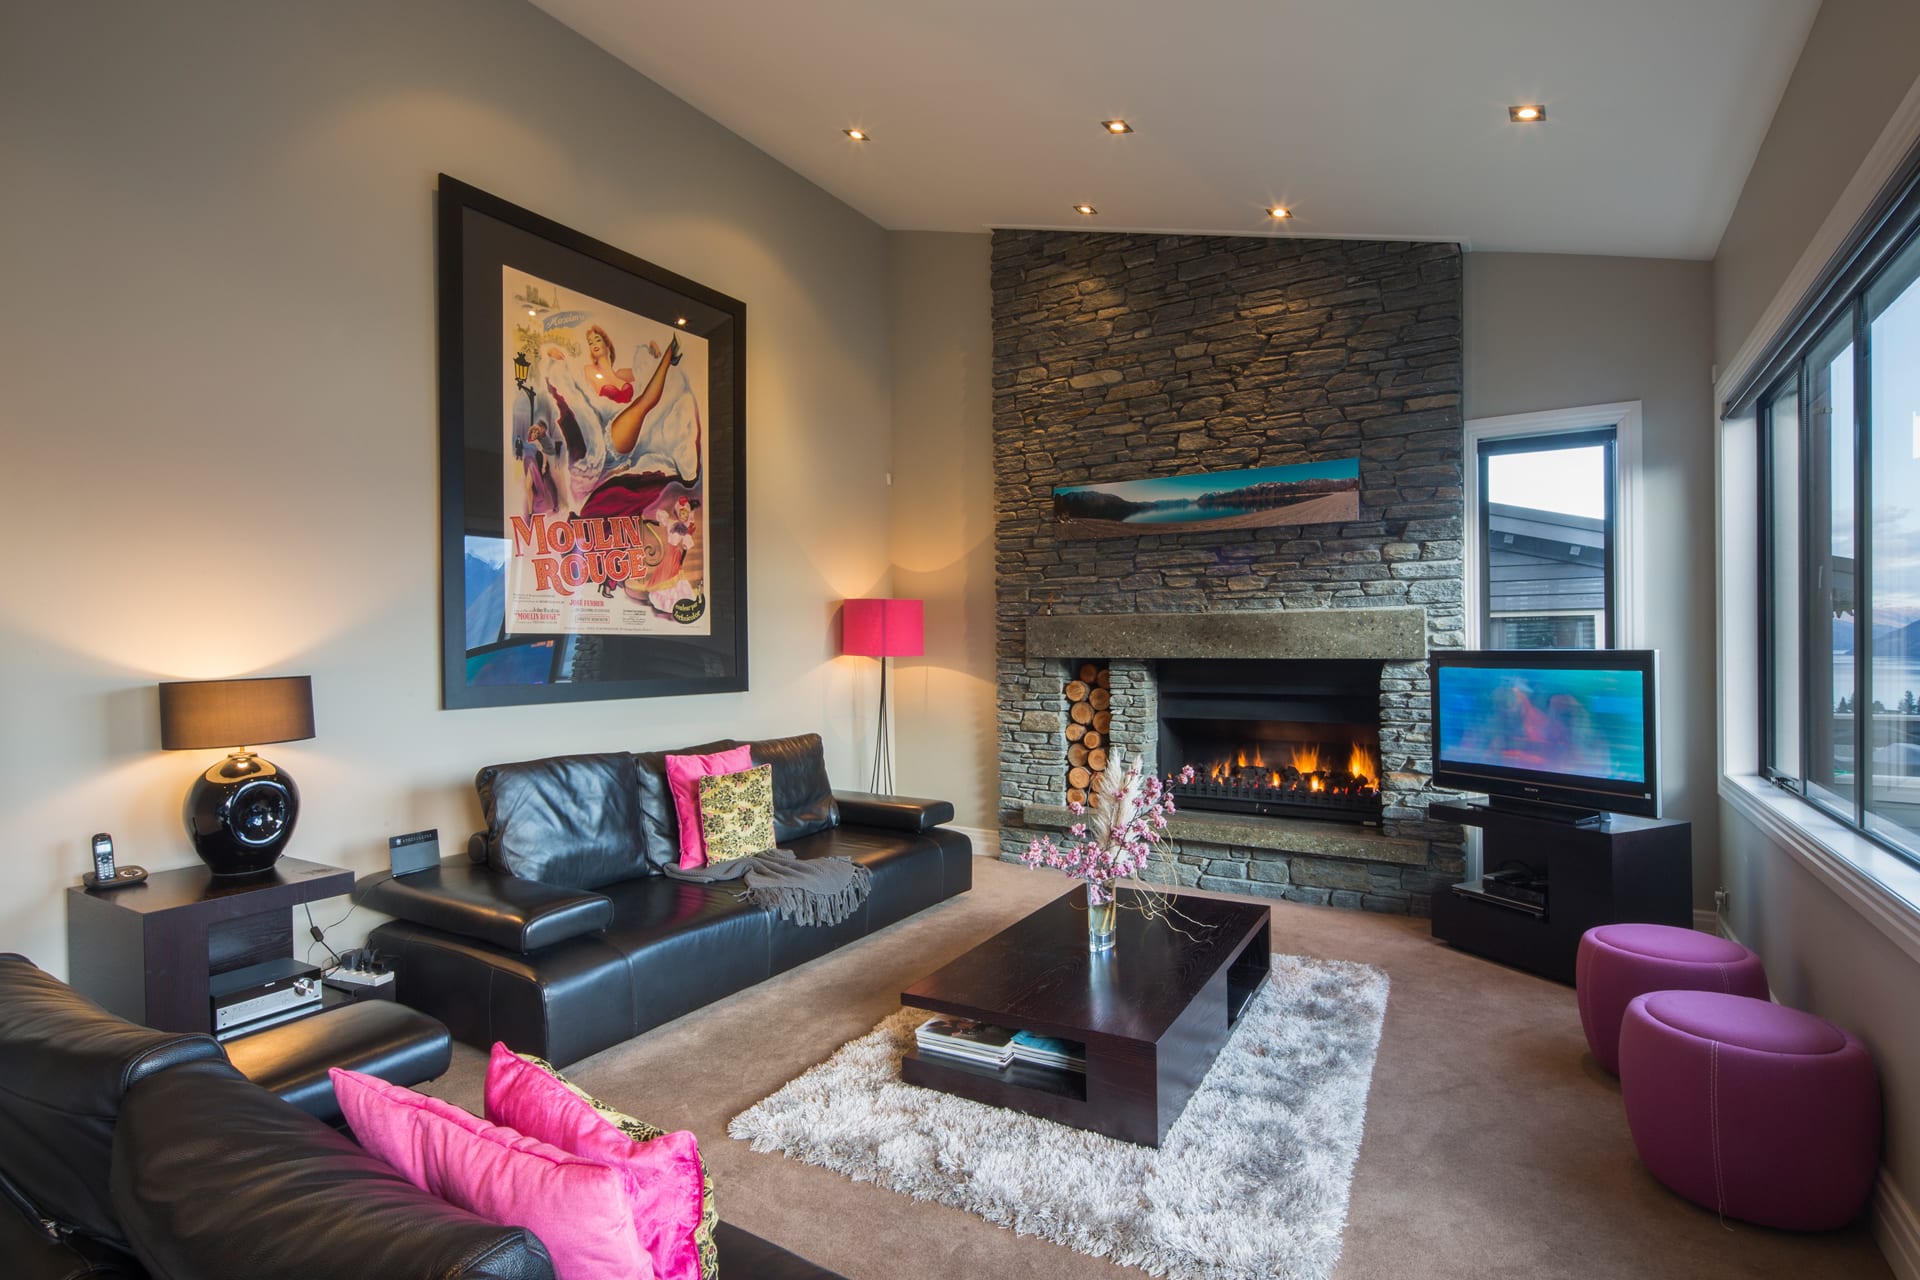 TV and a roaring fireplace for those chilly evenings